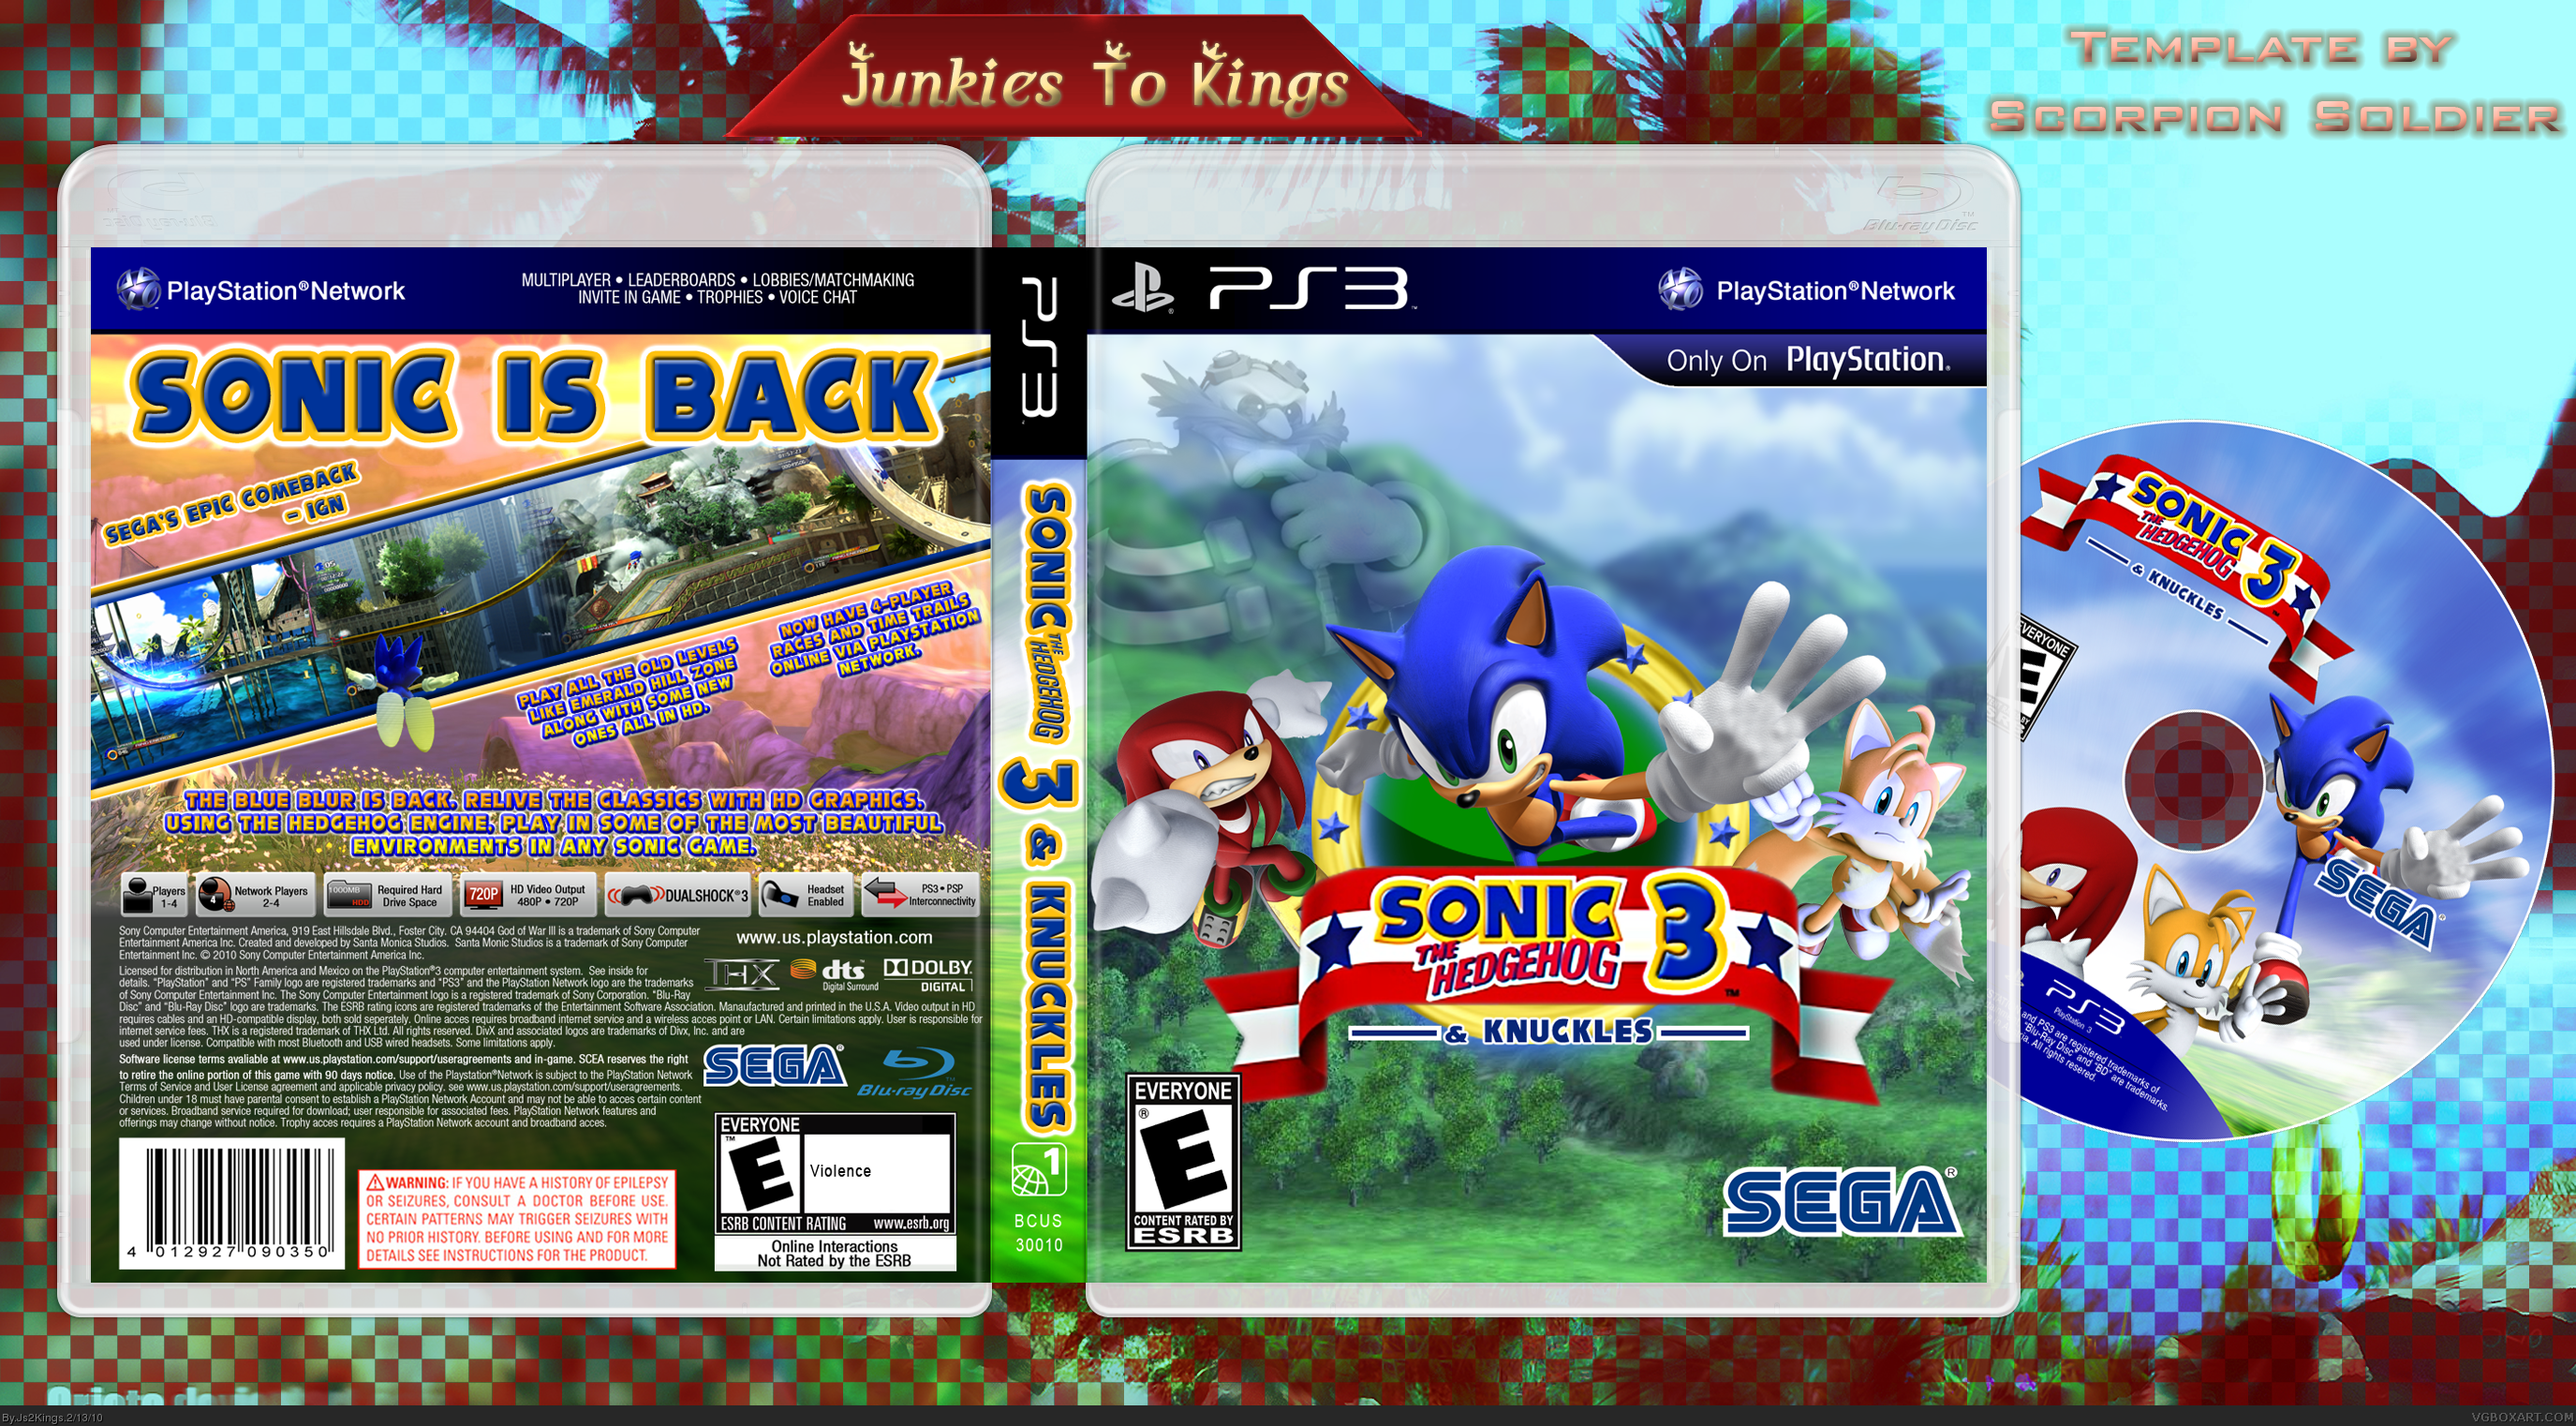 Диск Sonic 3 Air. Sonic 3 and Knuckles русская версия Ром. Sonic 3 Competition Plus. Sonic 3 Box. Sonic 3 air knuckles